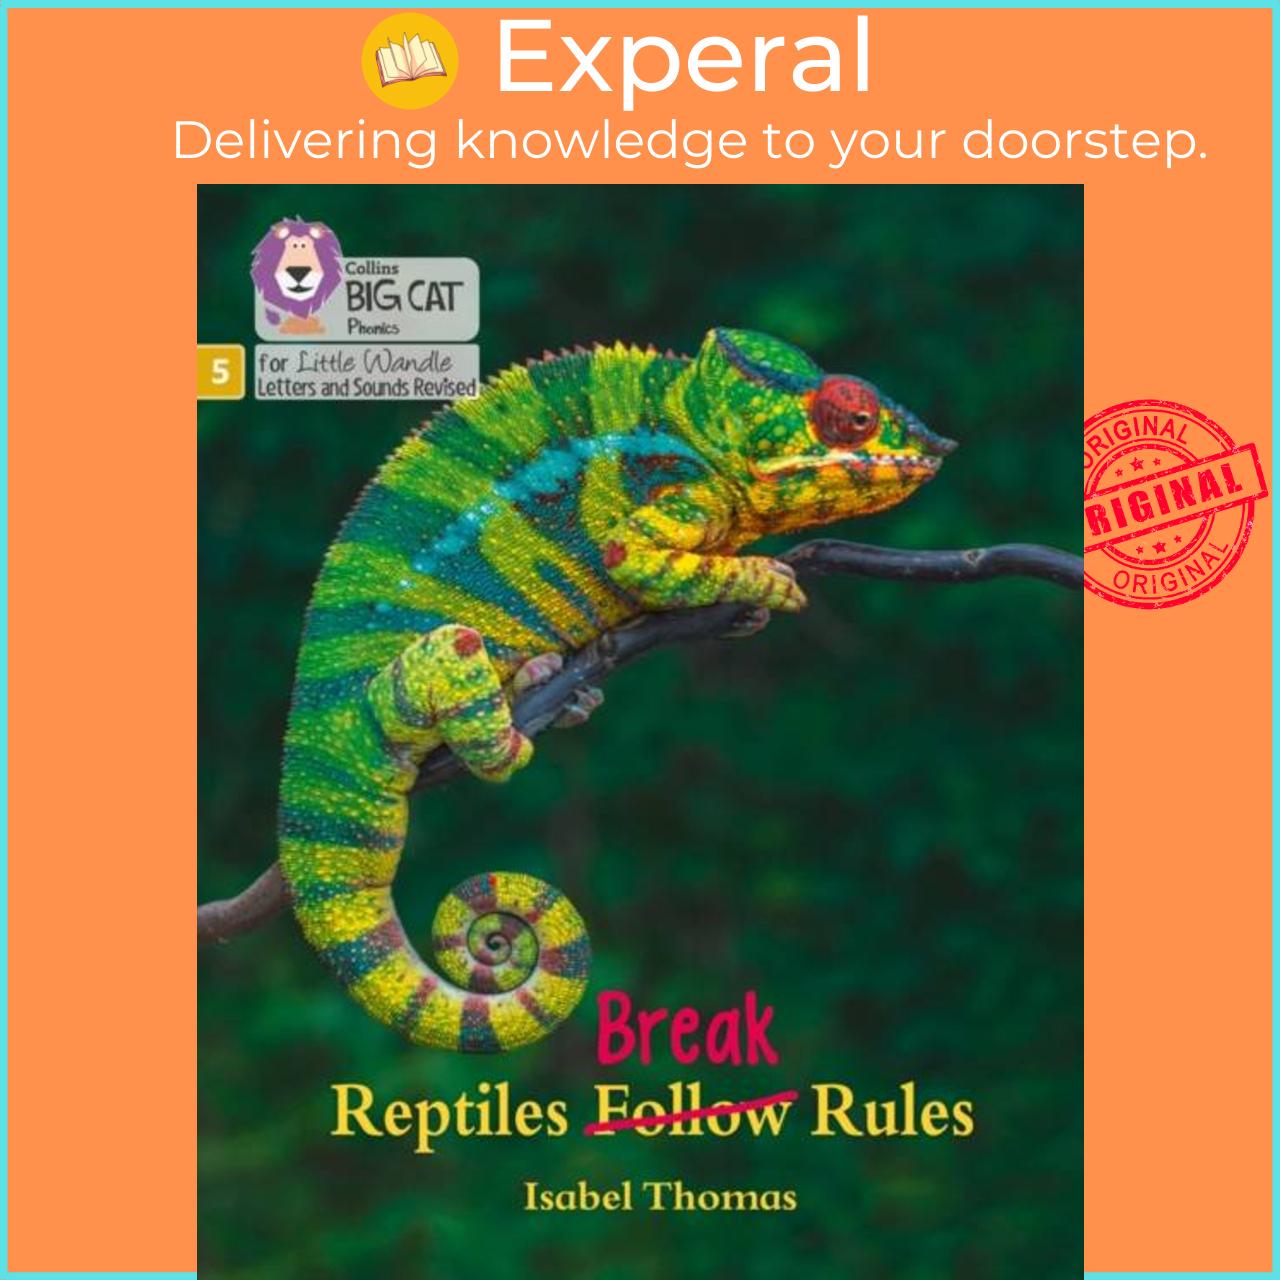 Sách - Reptiles Break Rules - Phase 5 Set 5 by Isabel Thomas (UK edition, paperback)